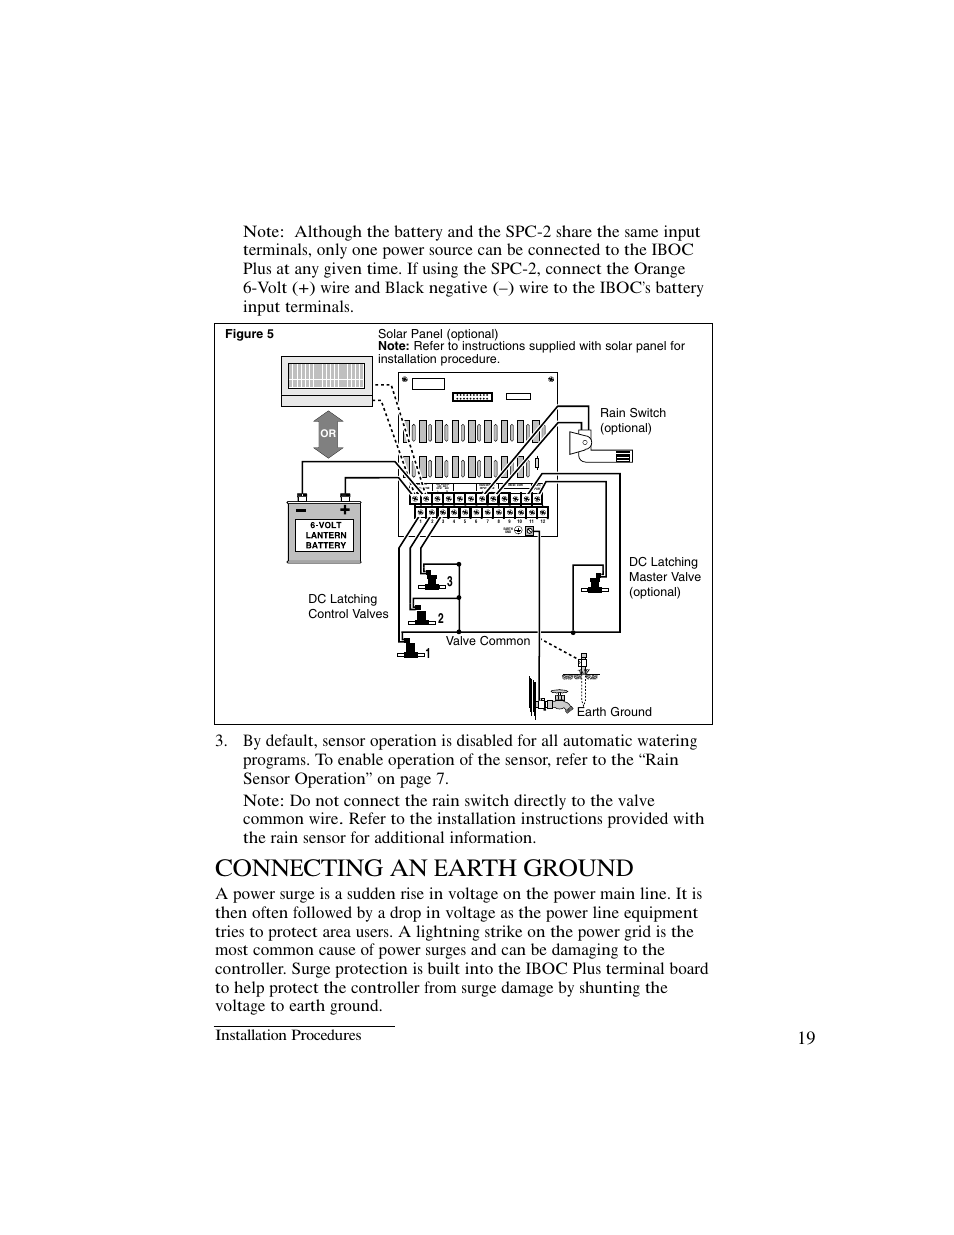 Connecting an earth ground, Installation procedures | Irritrol IBOC-Plus User Manual | Page 21 / 28